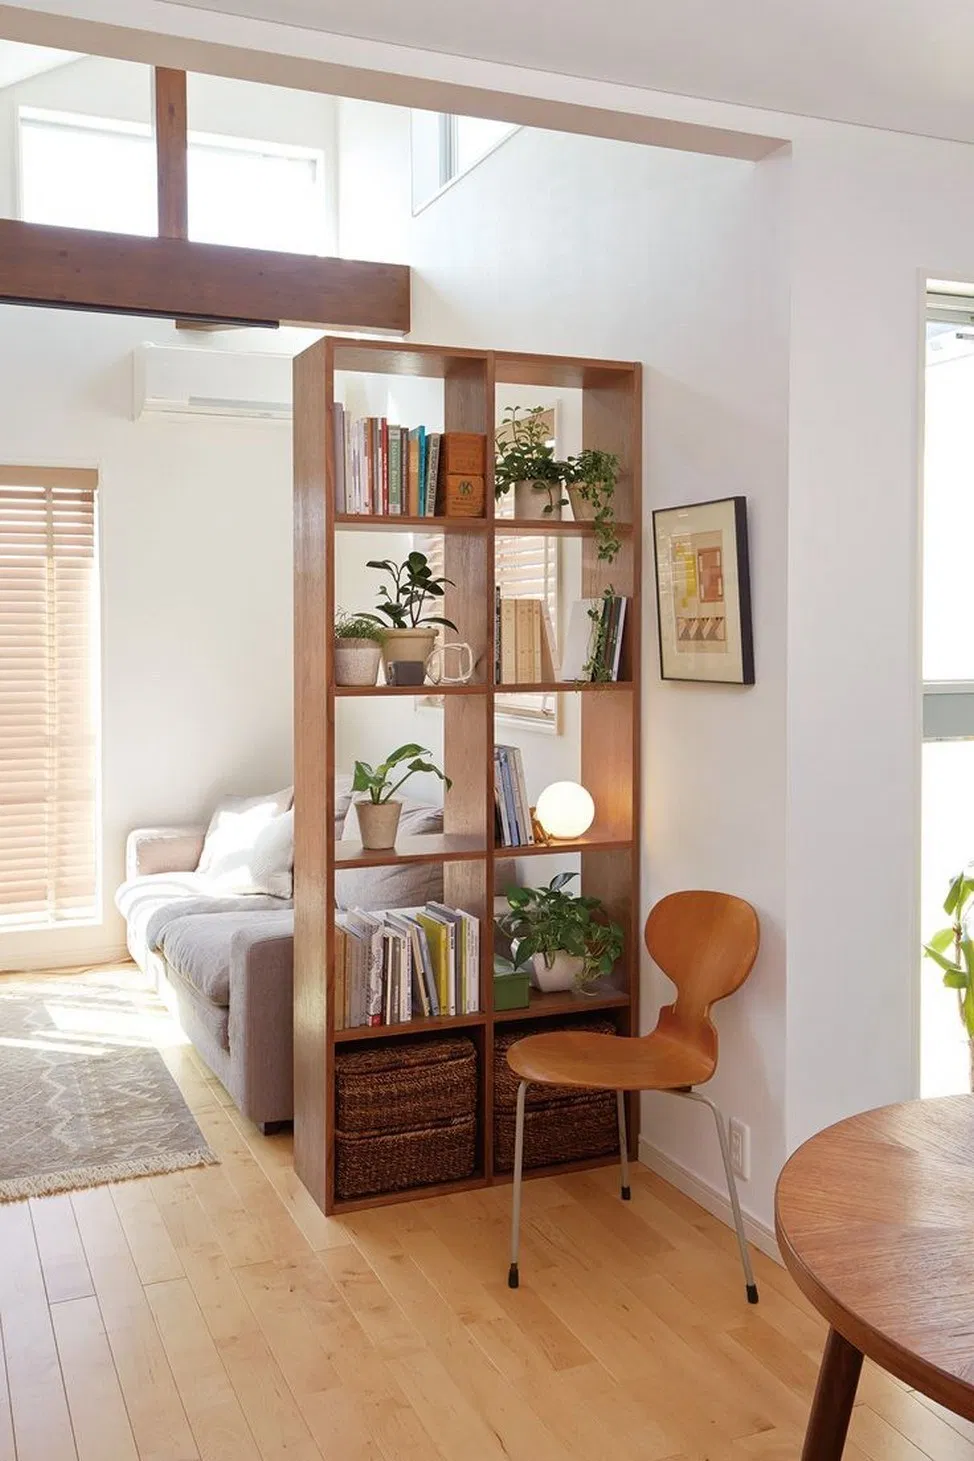 50 Studio Apartment Layouts That Just Work! - Small Space Decor.